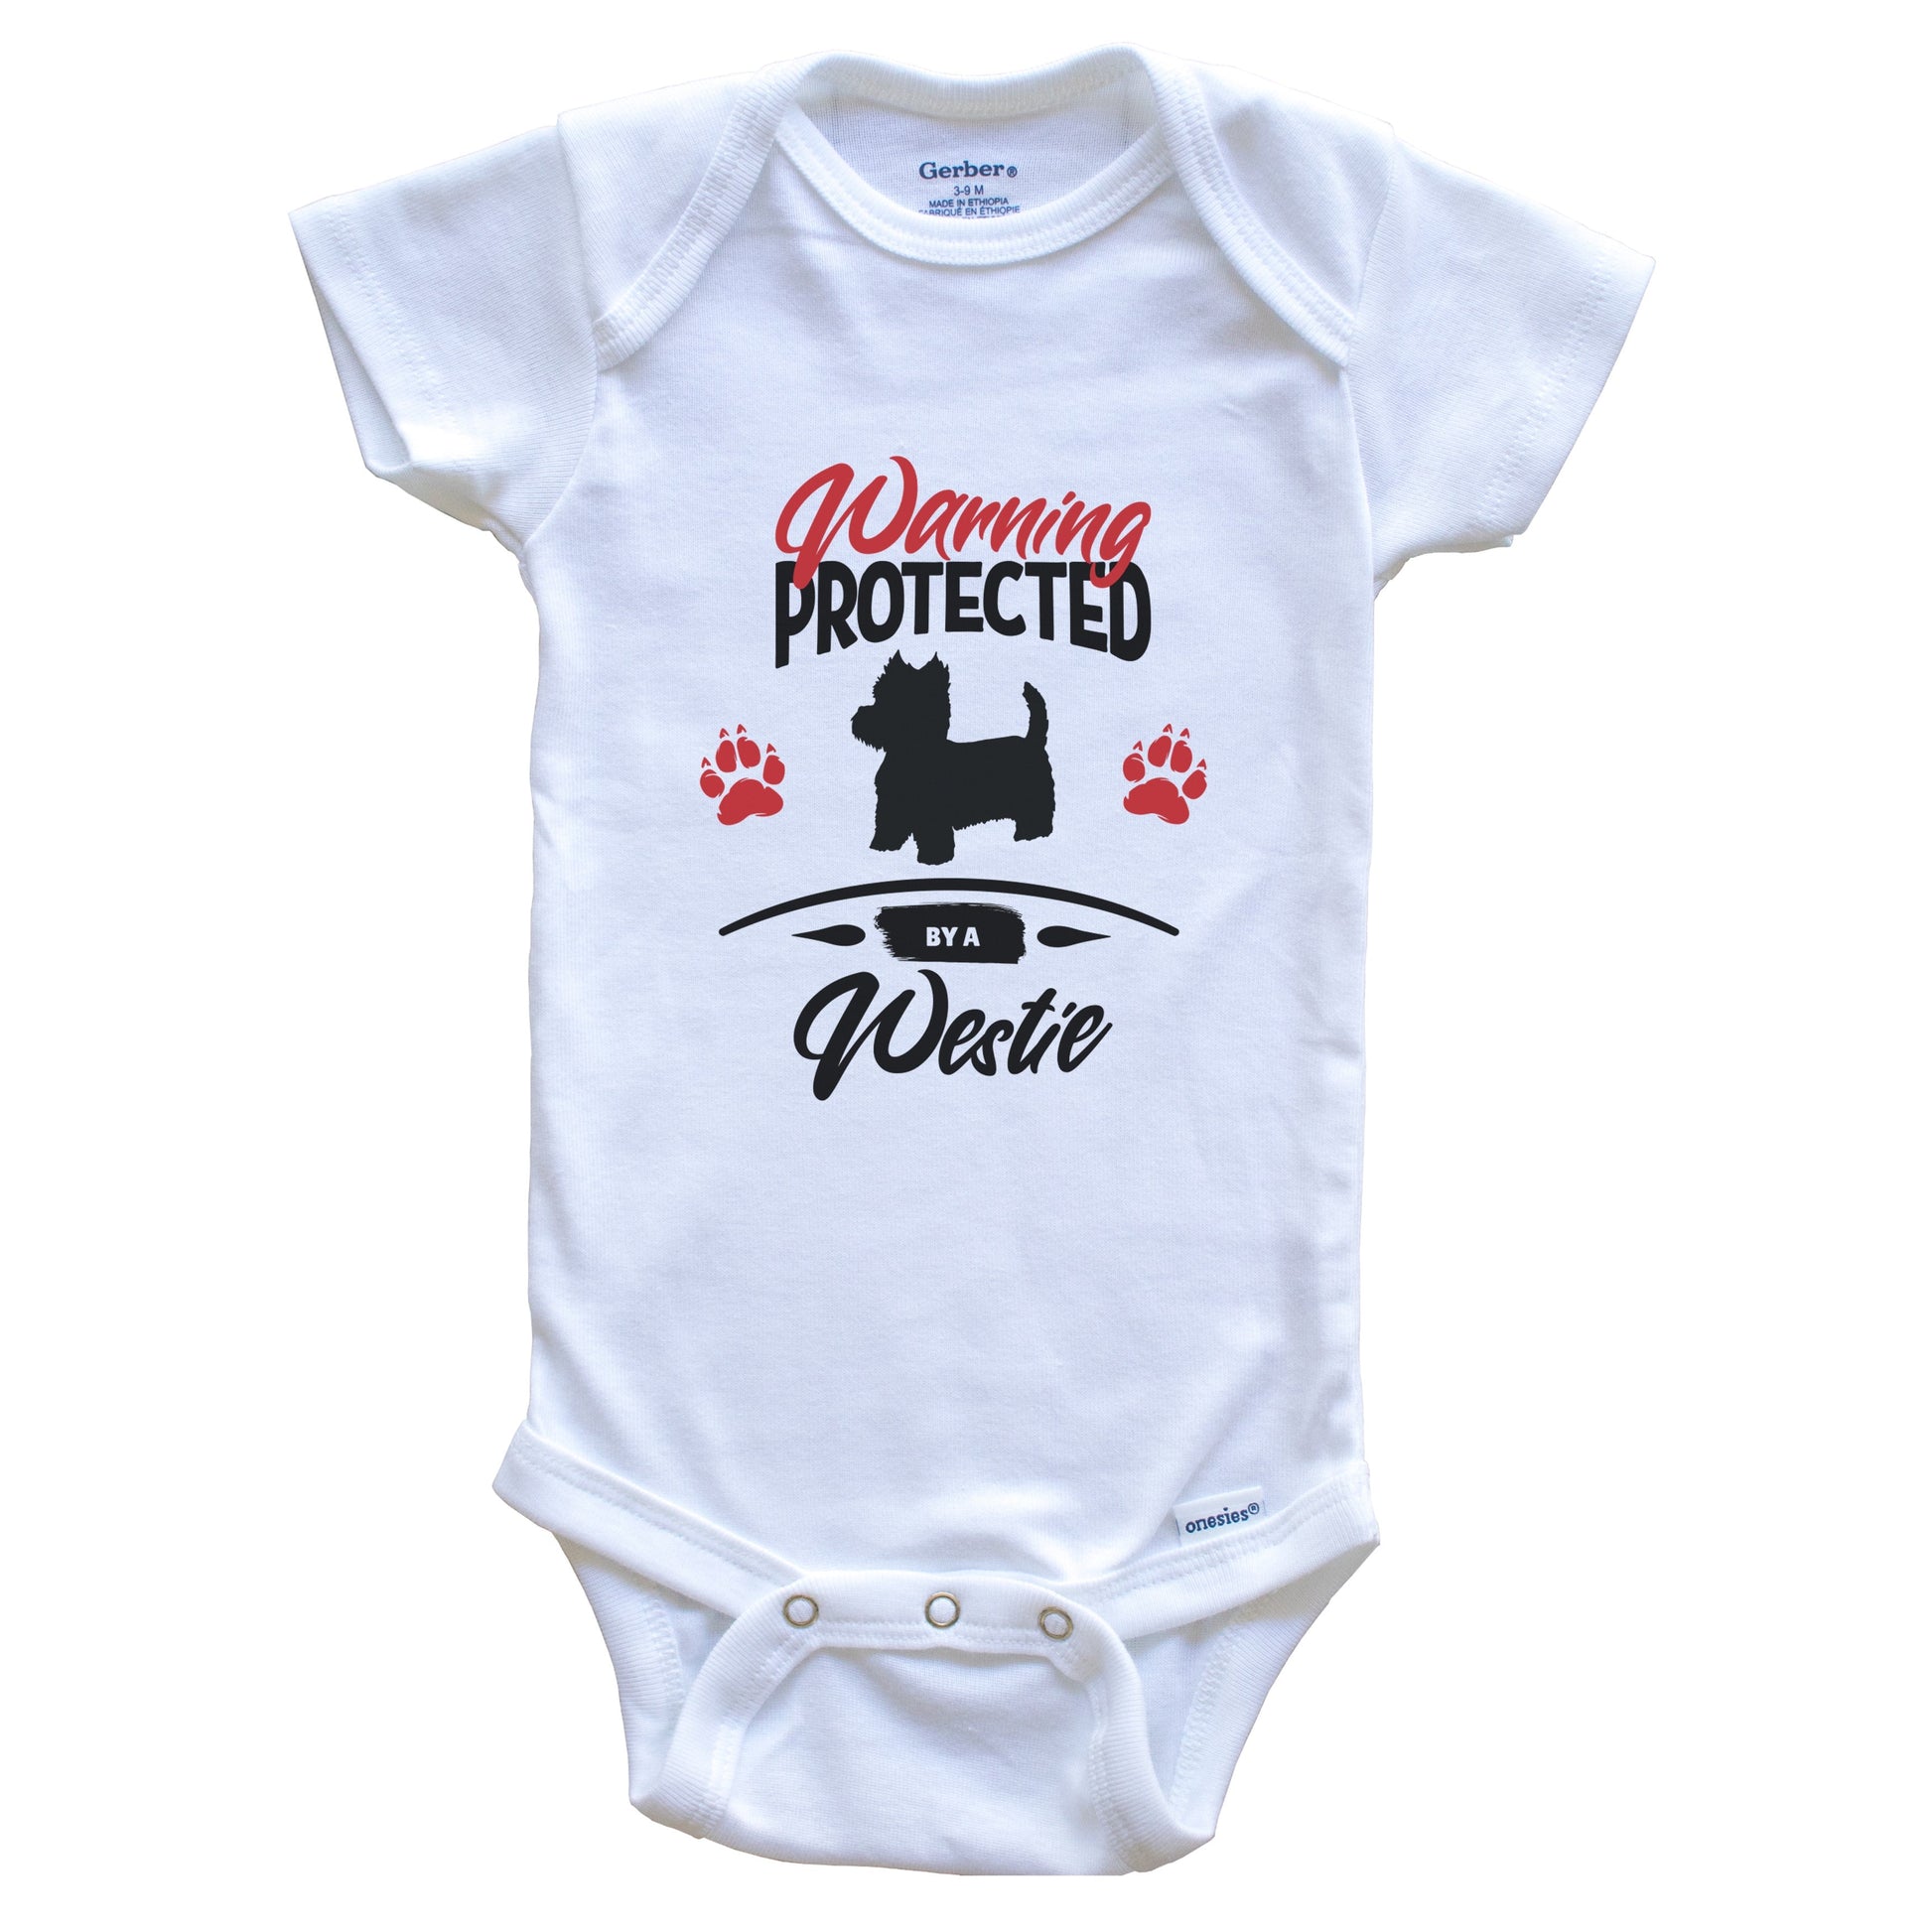 Warning Protected By A Westie Funny Dog Owner Baby Bodysuit